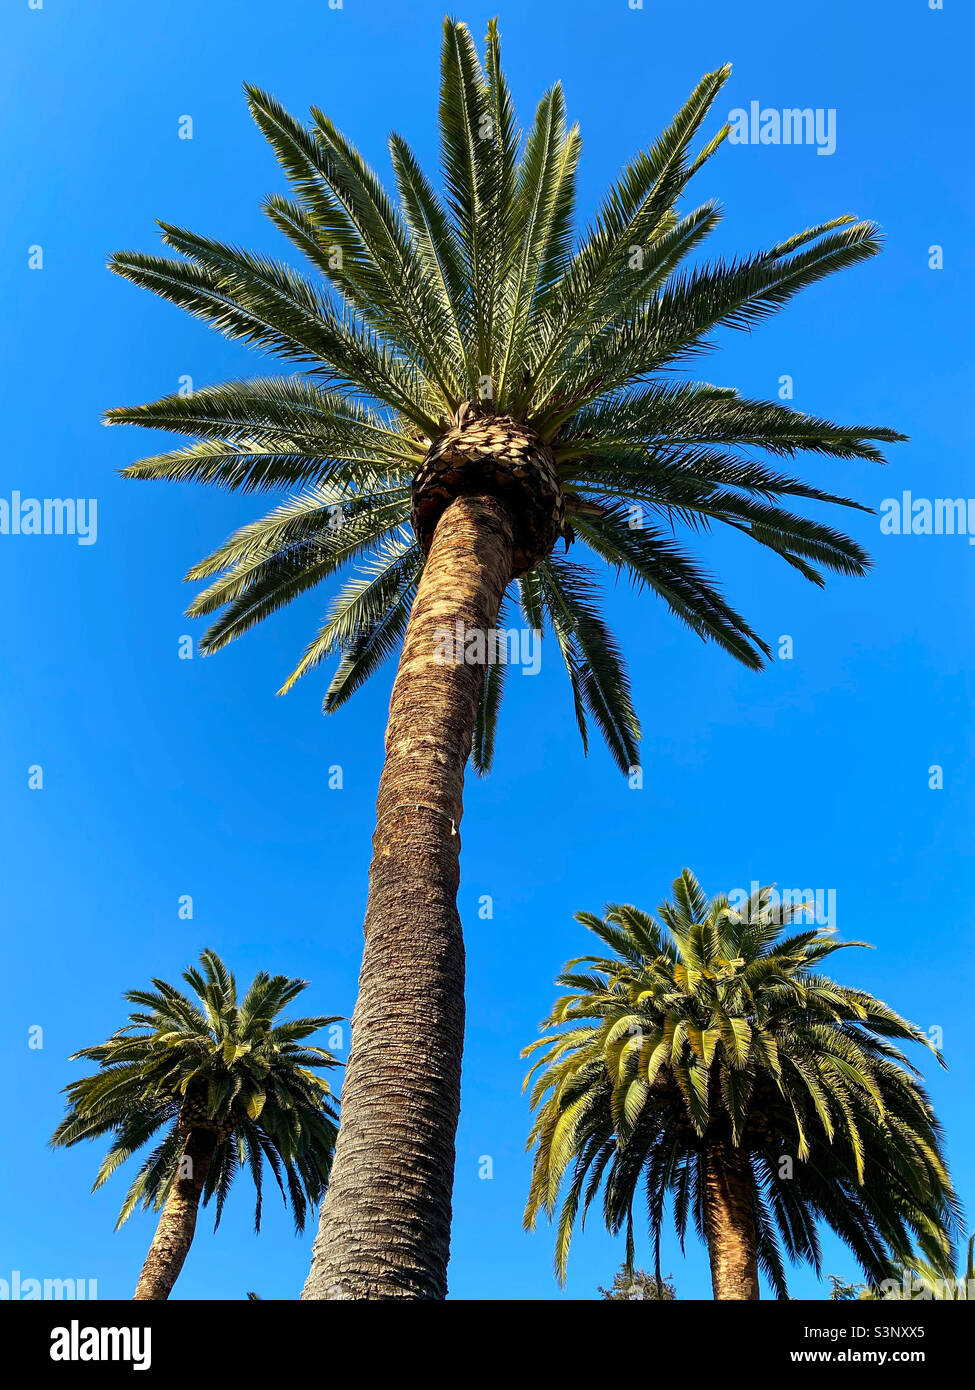 Three palm trees against a blue sky Stock Photo